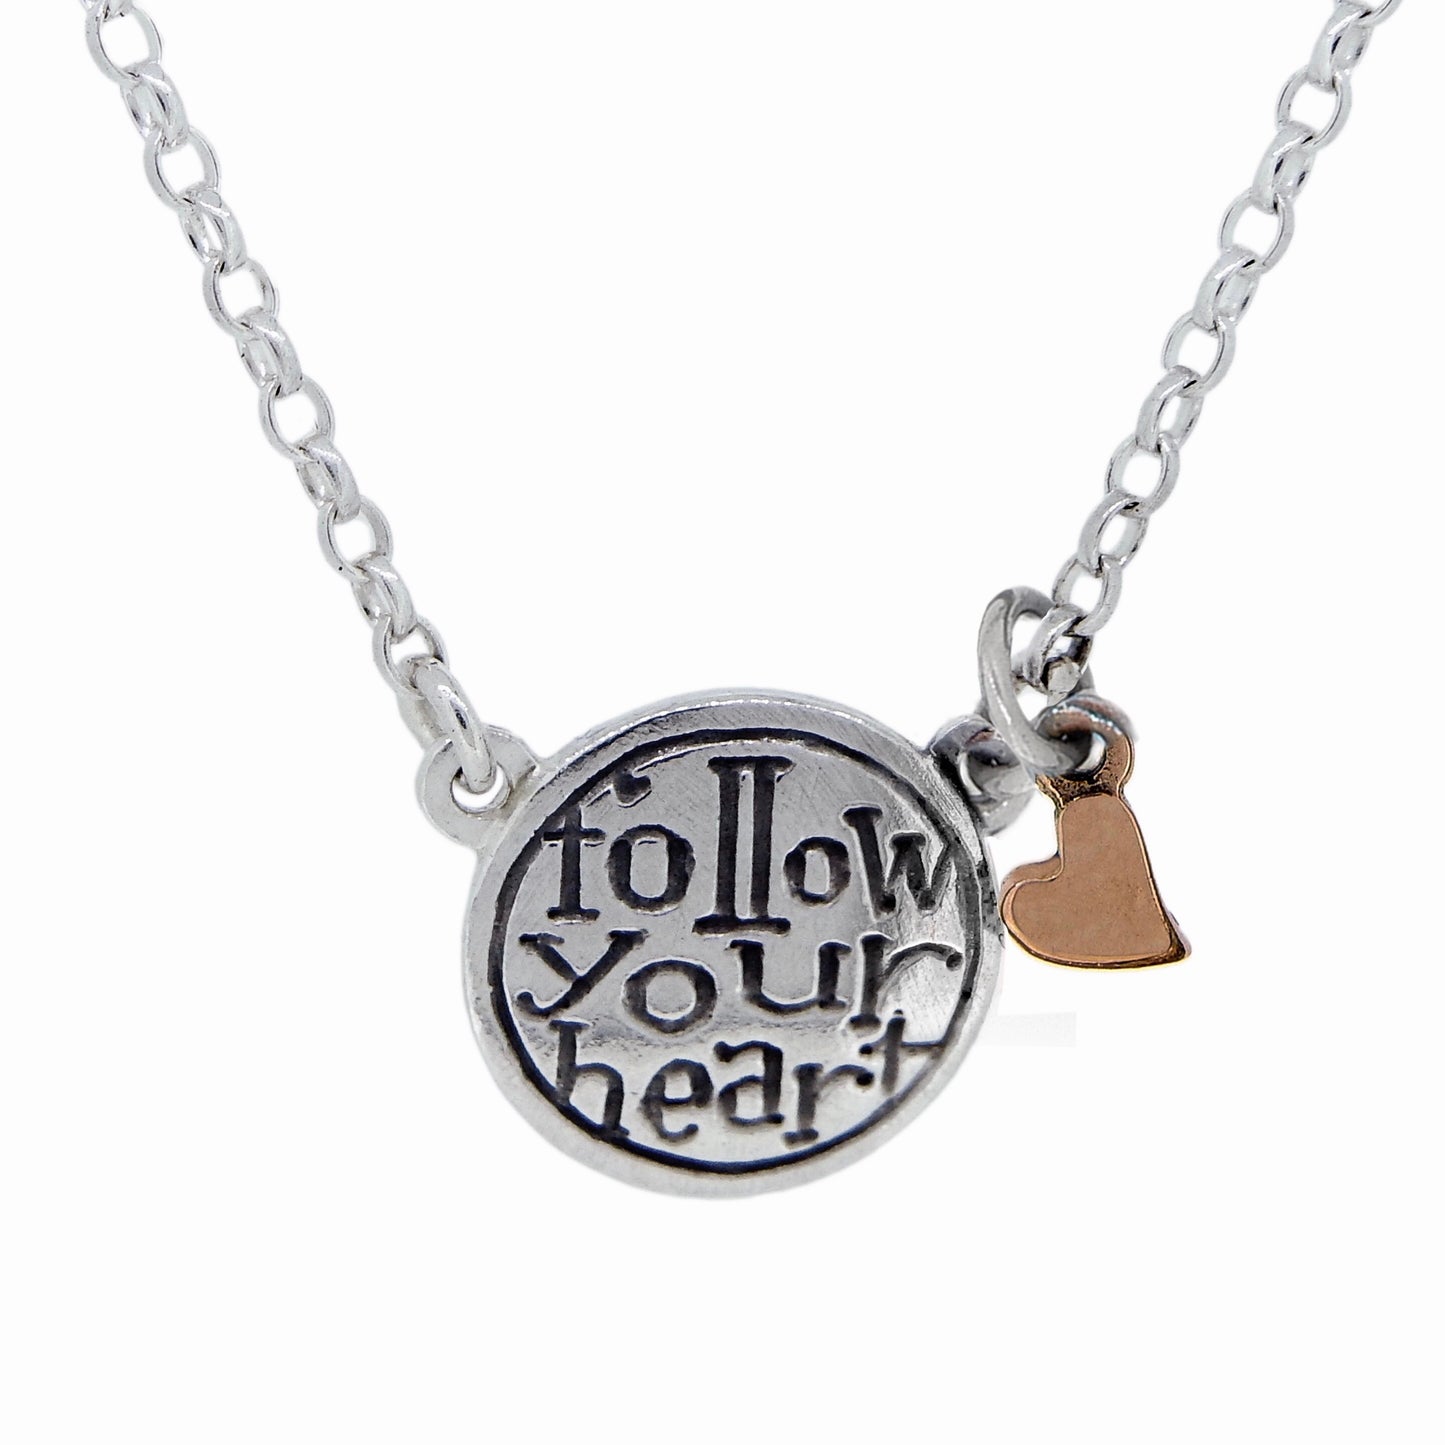 'Follow Your Heart', necklace